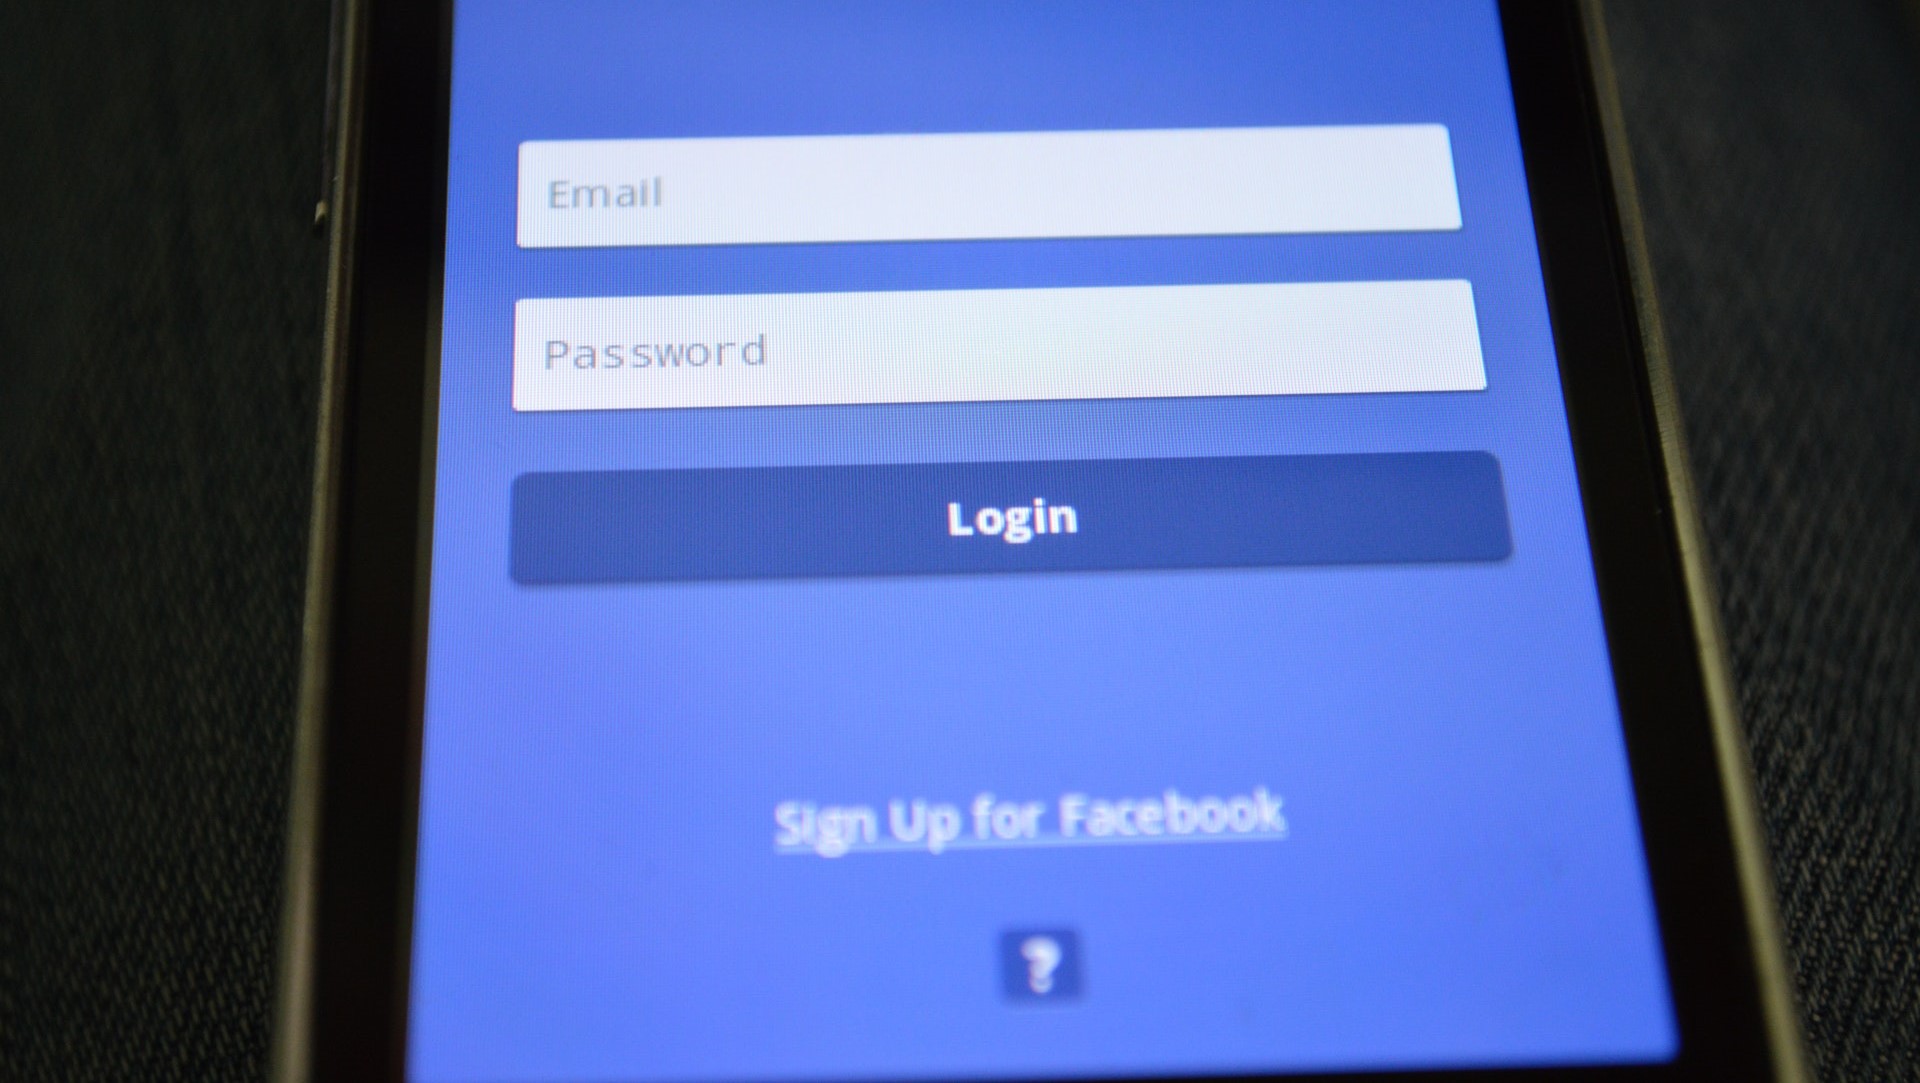 Facebook login page displayed on a smartphone